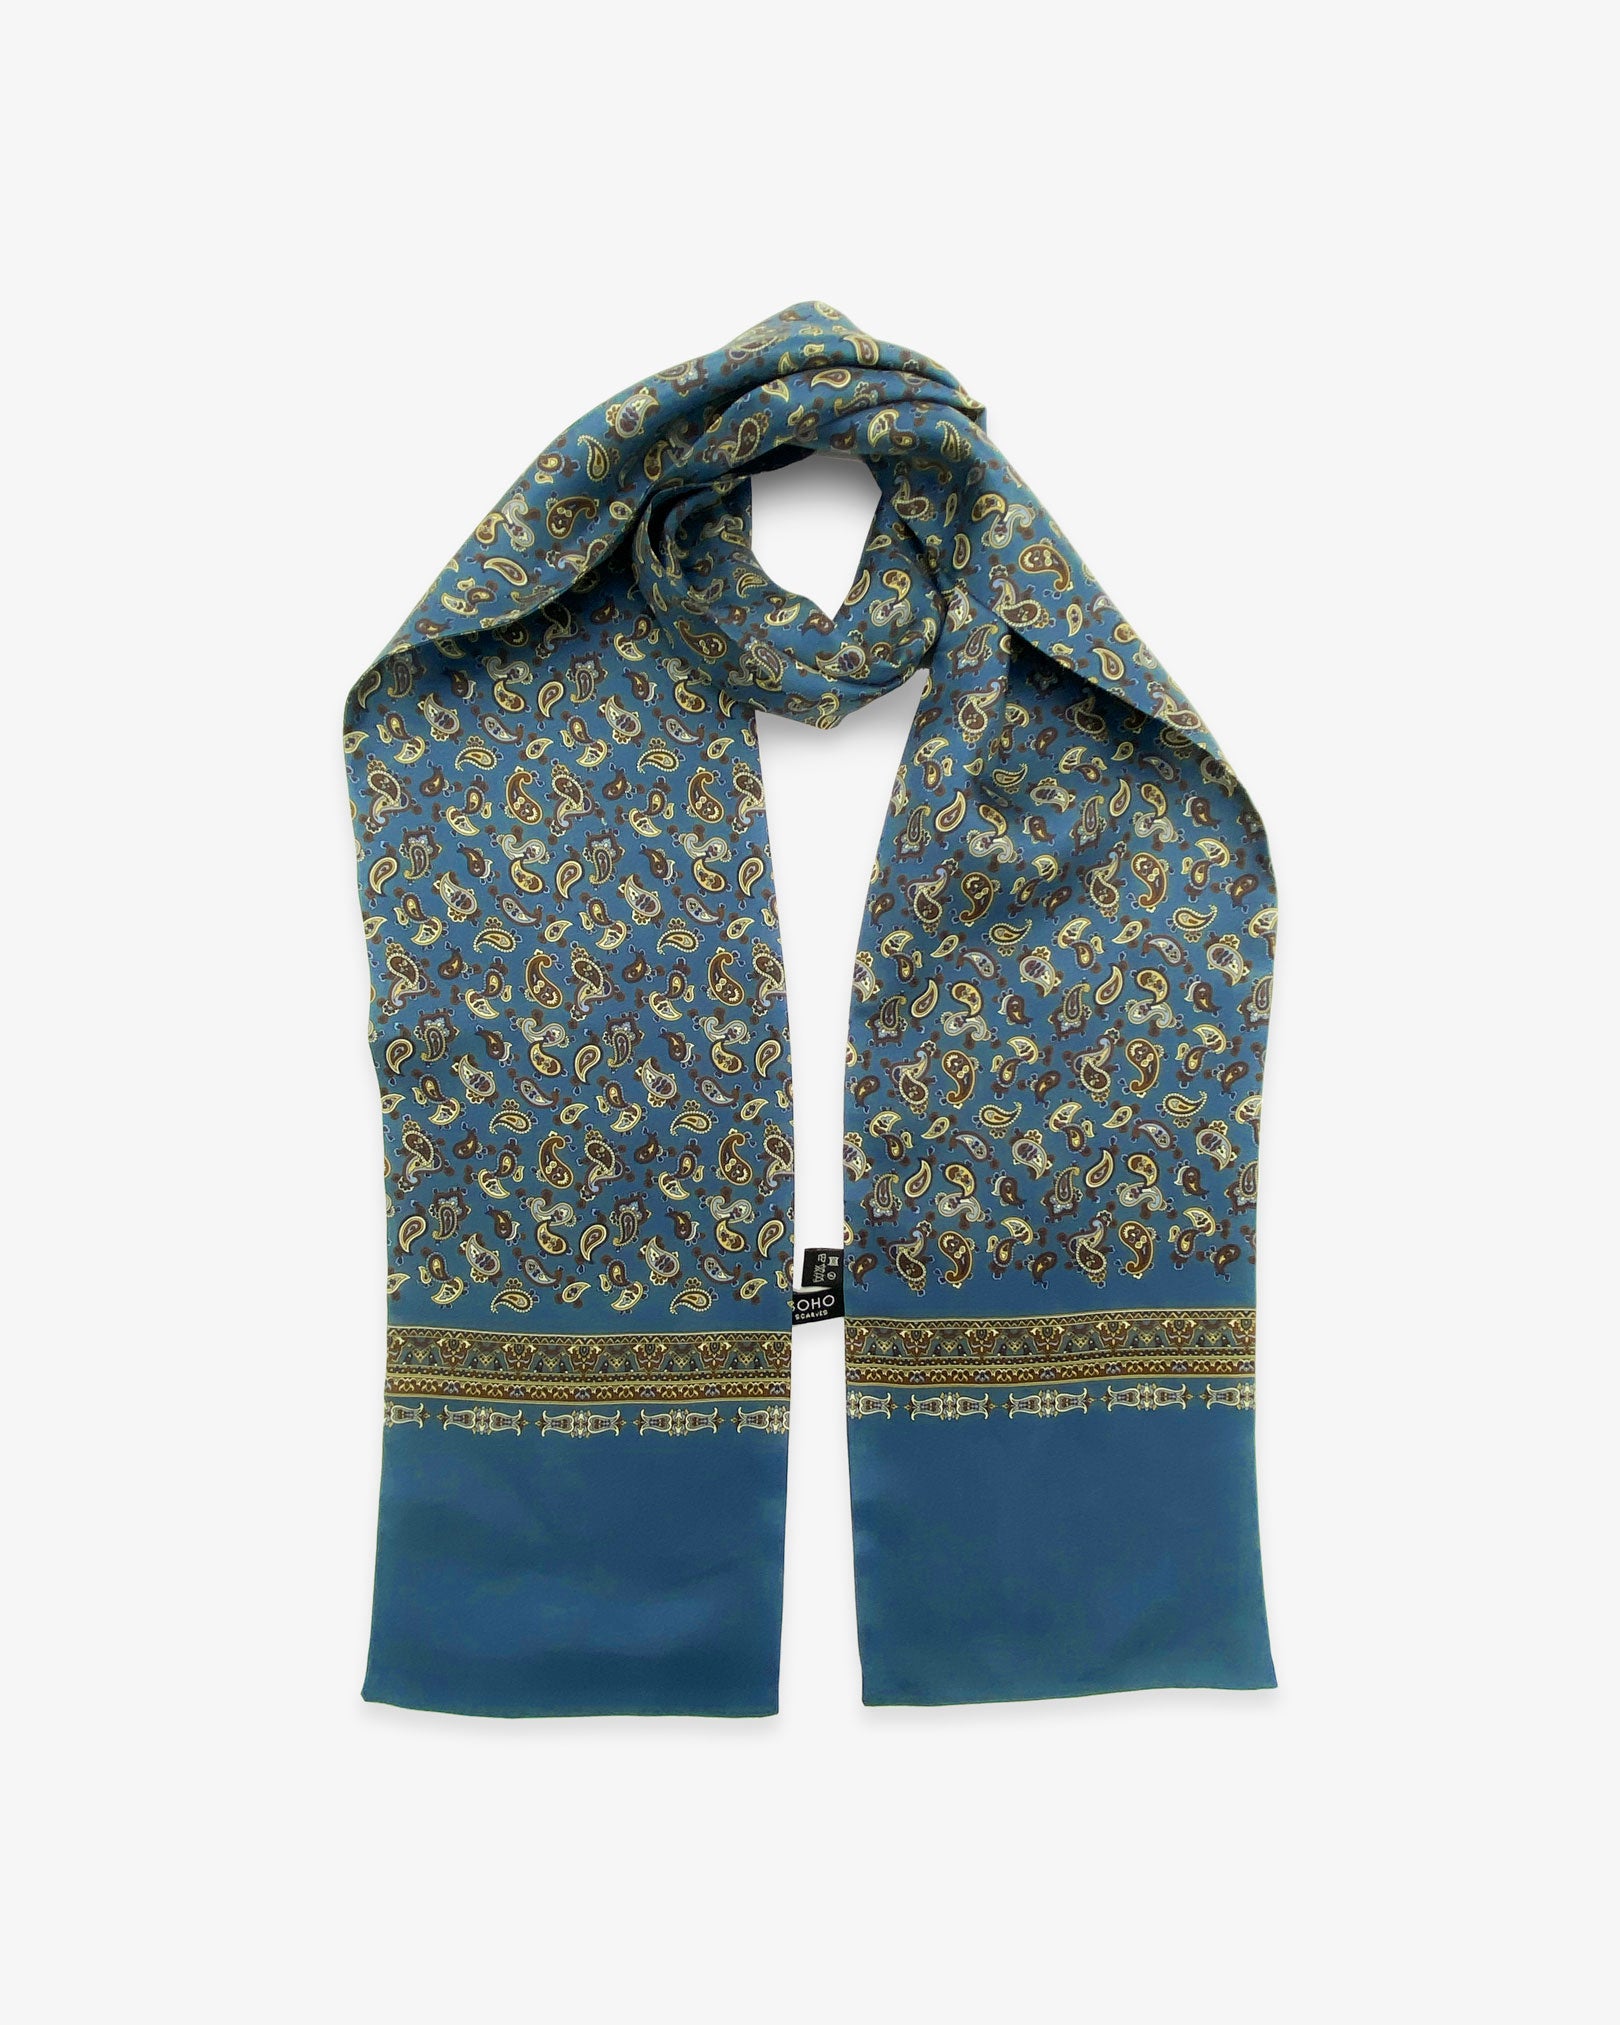 The Banff polyester scarf looped in middle with both ends parallel showing the paisley pure silk scarf on a peacock blue background. Clearly showing the blue, black and lemon yellow paisley patterns and the ornate, decorative border.